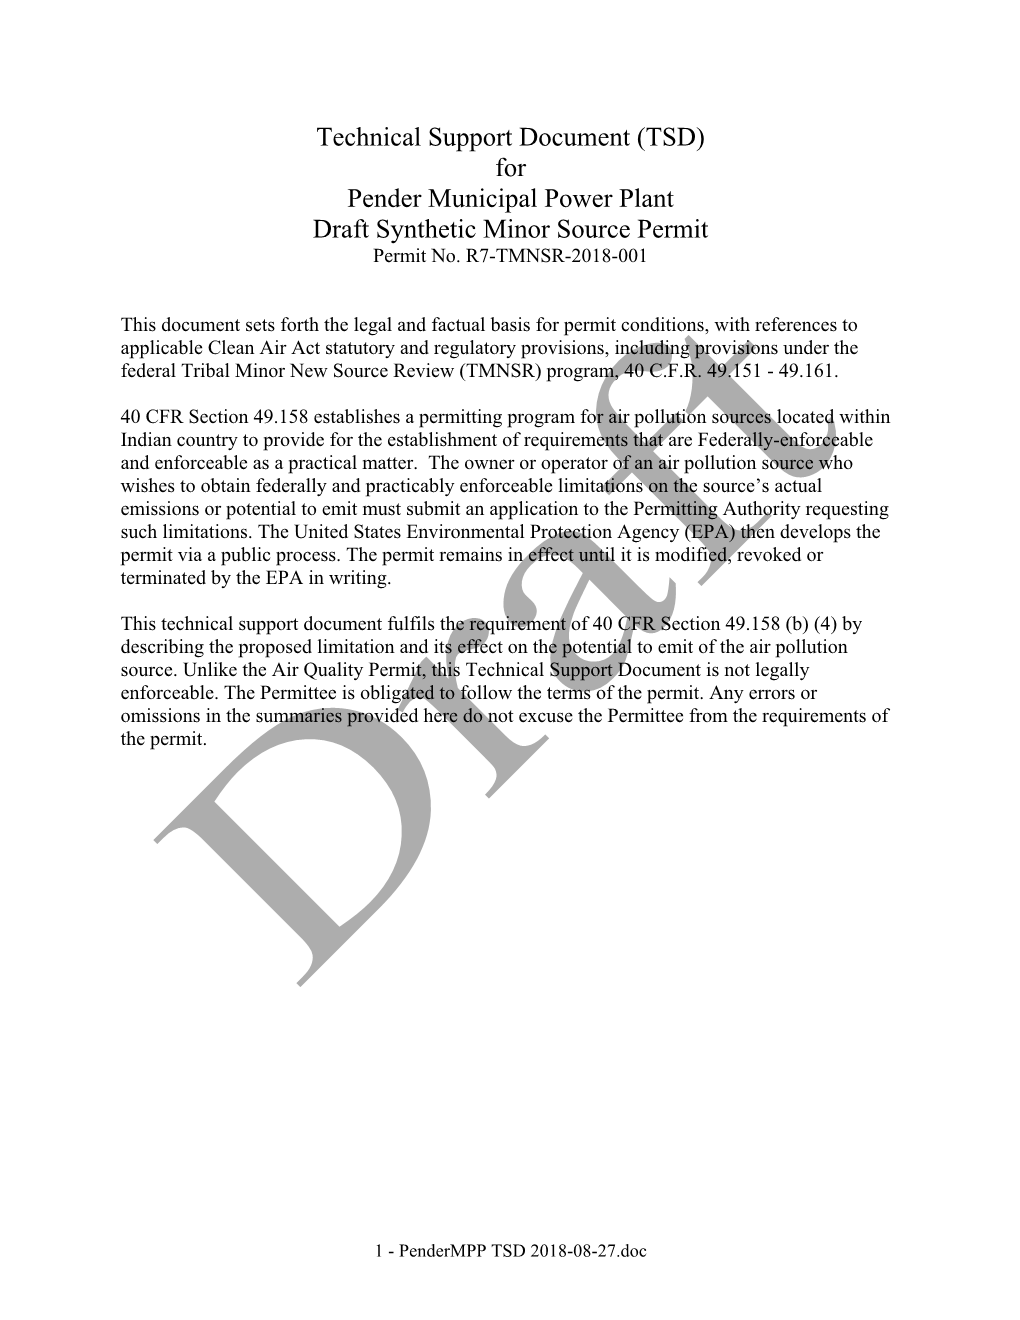 Technical Support Document (TSD) for Pender Municipal Power Plant Draft Synthetic Minor Source Permit Permit No